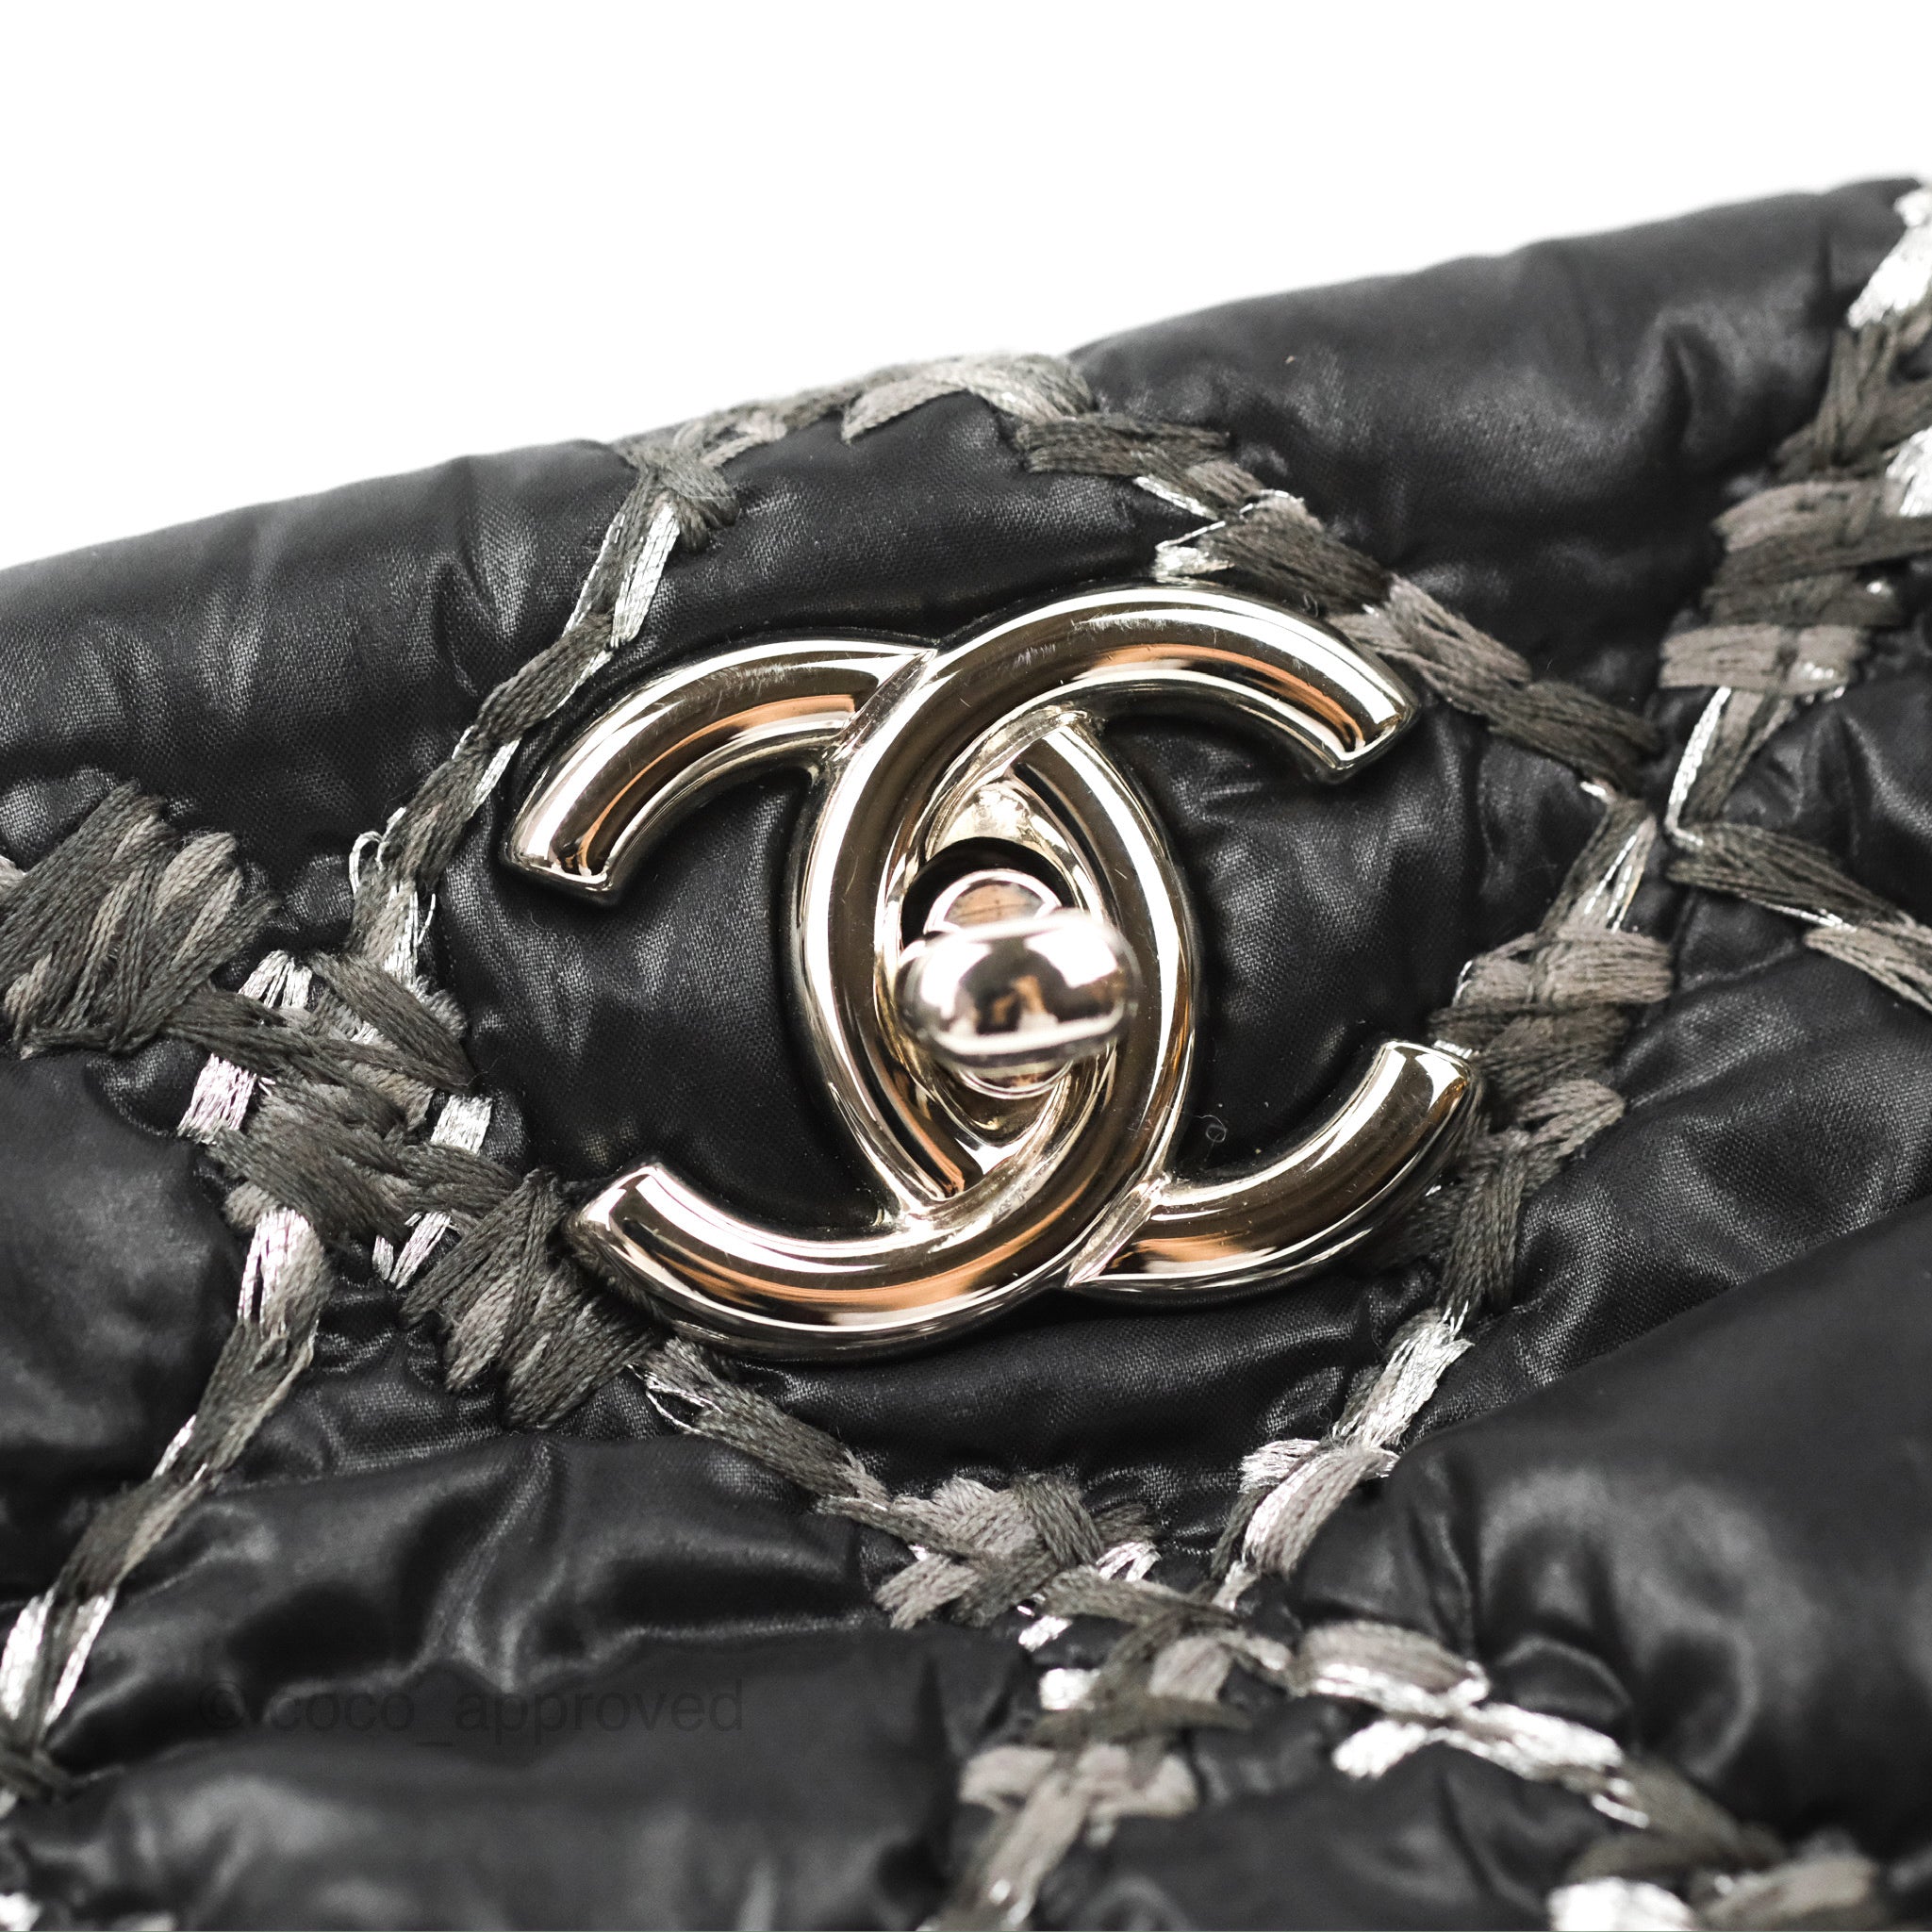 Chanel Burgundy Quilted Nylon Tweed on Stitch Flap Bag Silver Hardware, 2010-2011 (Very Good)